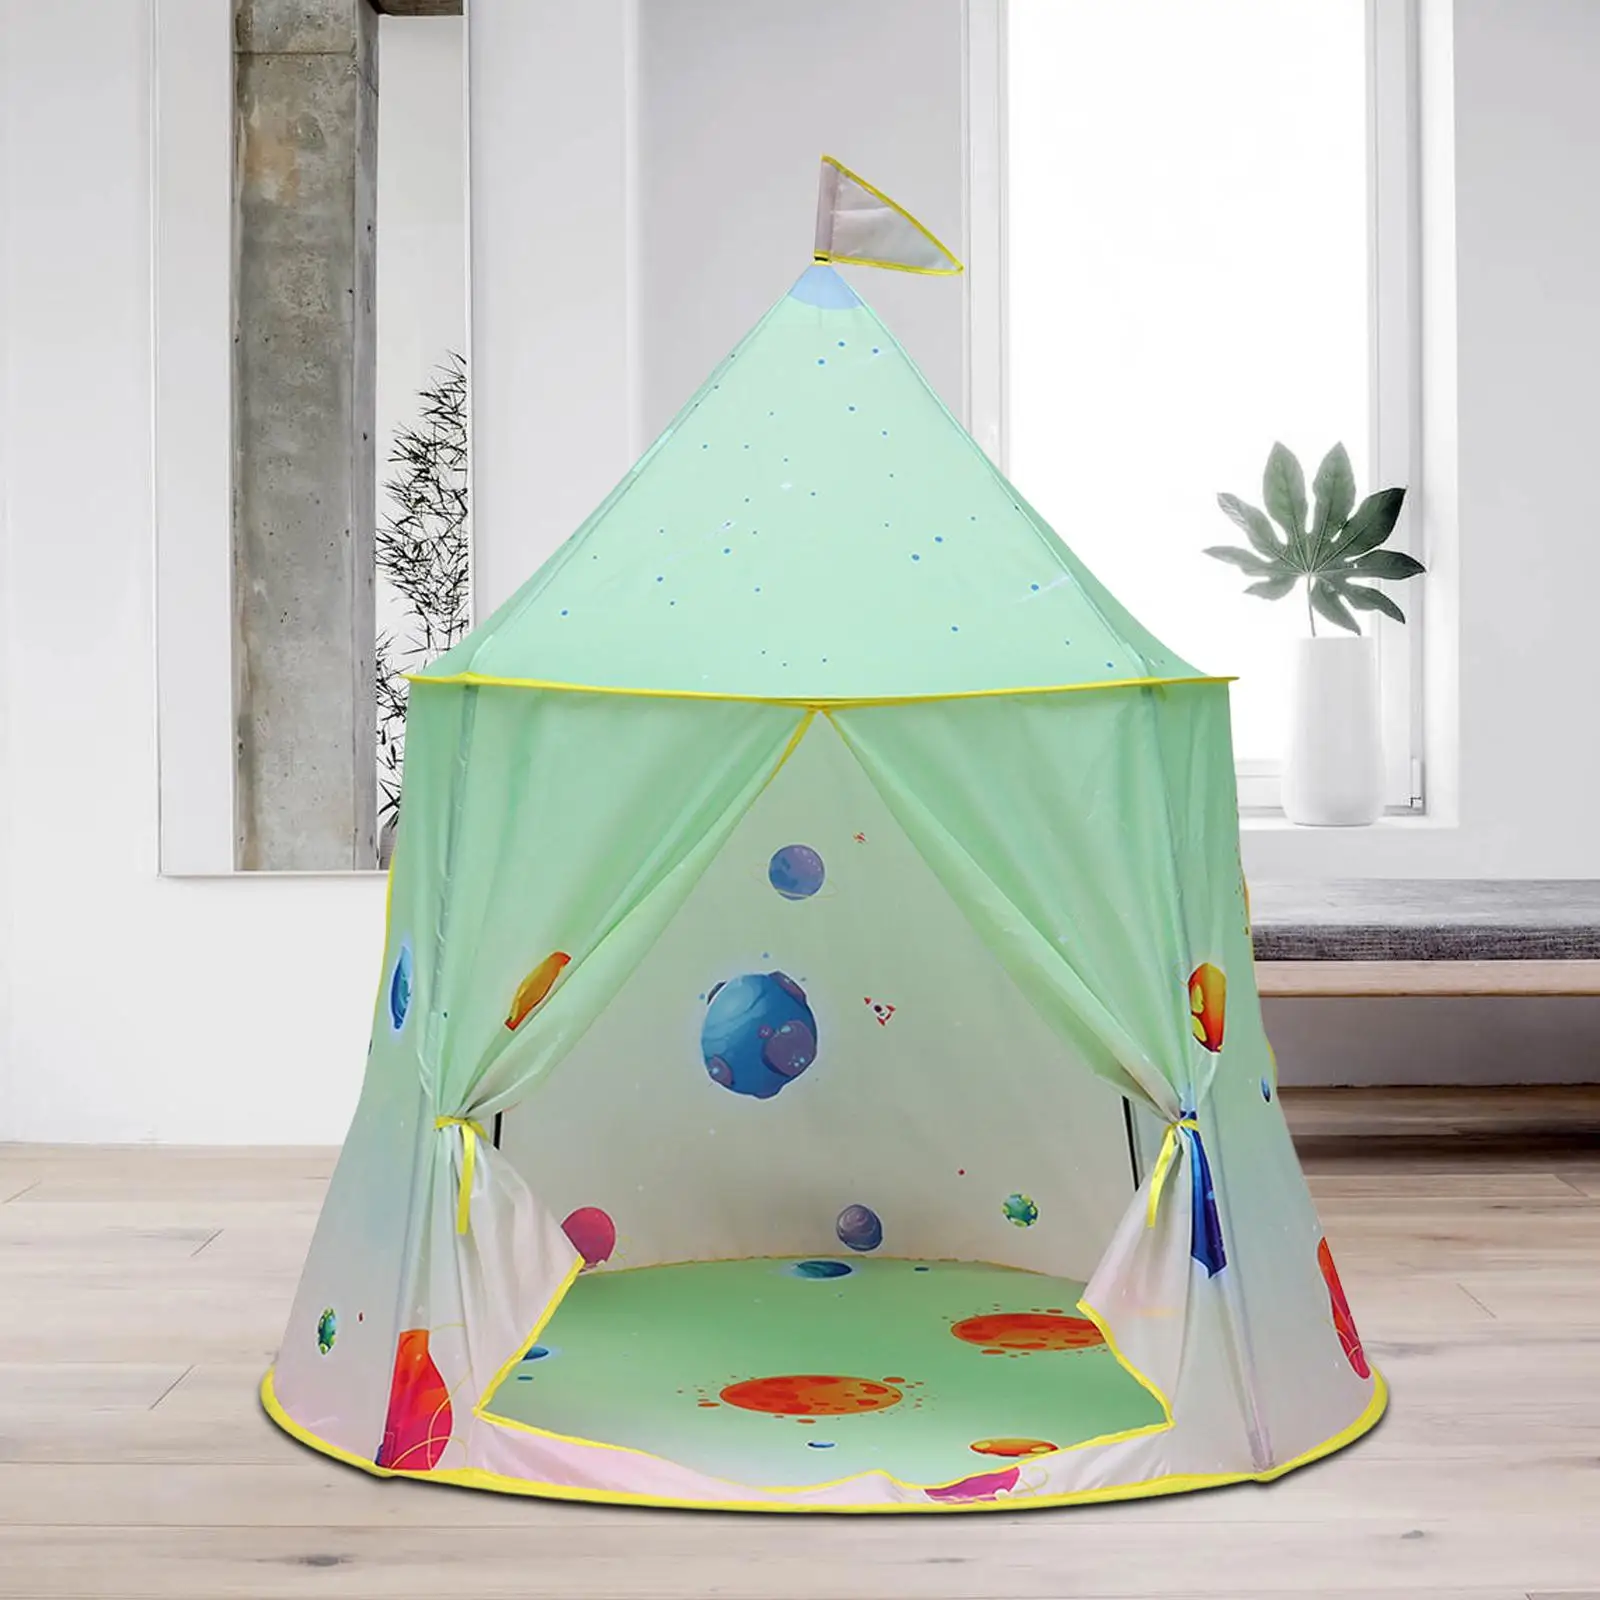 Space Themed Play Tent Foldable Outer Space Rocket Kids Play House Playhouse Tent Spaceship Tent for Indoor Boy Girl Gifts